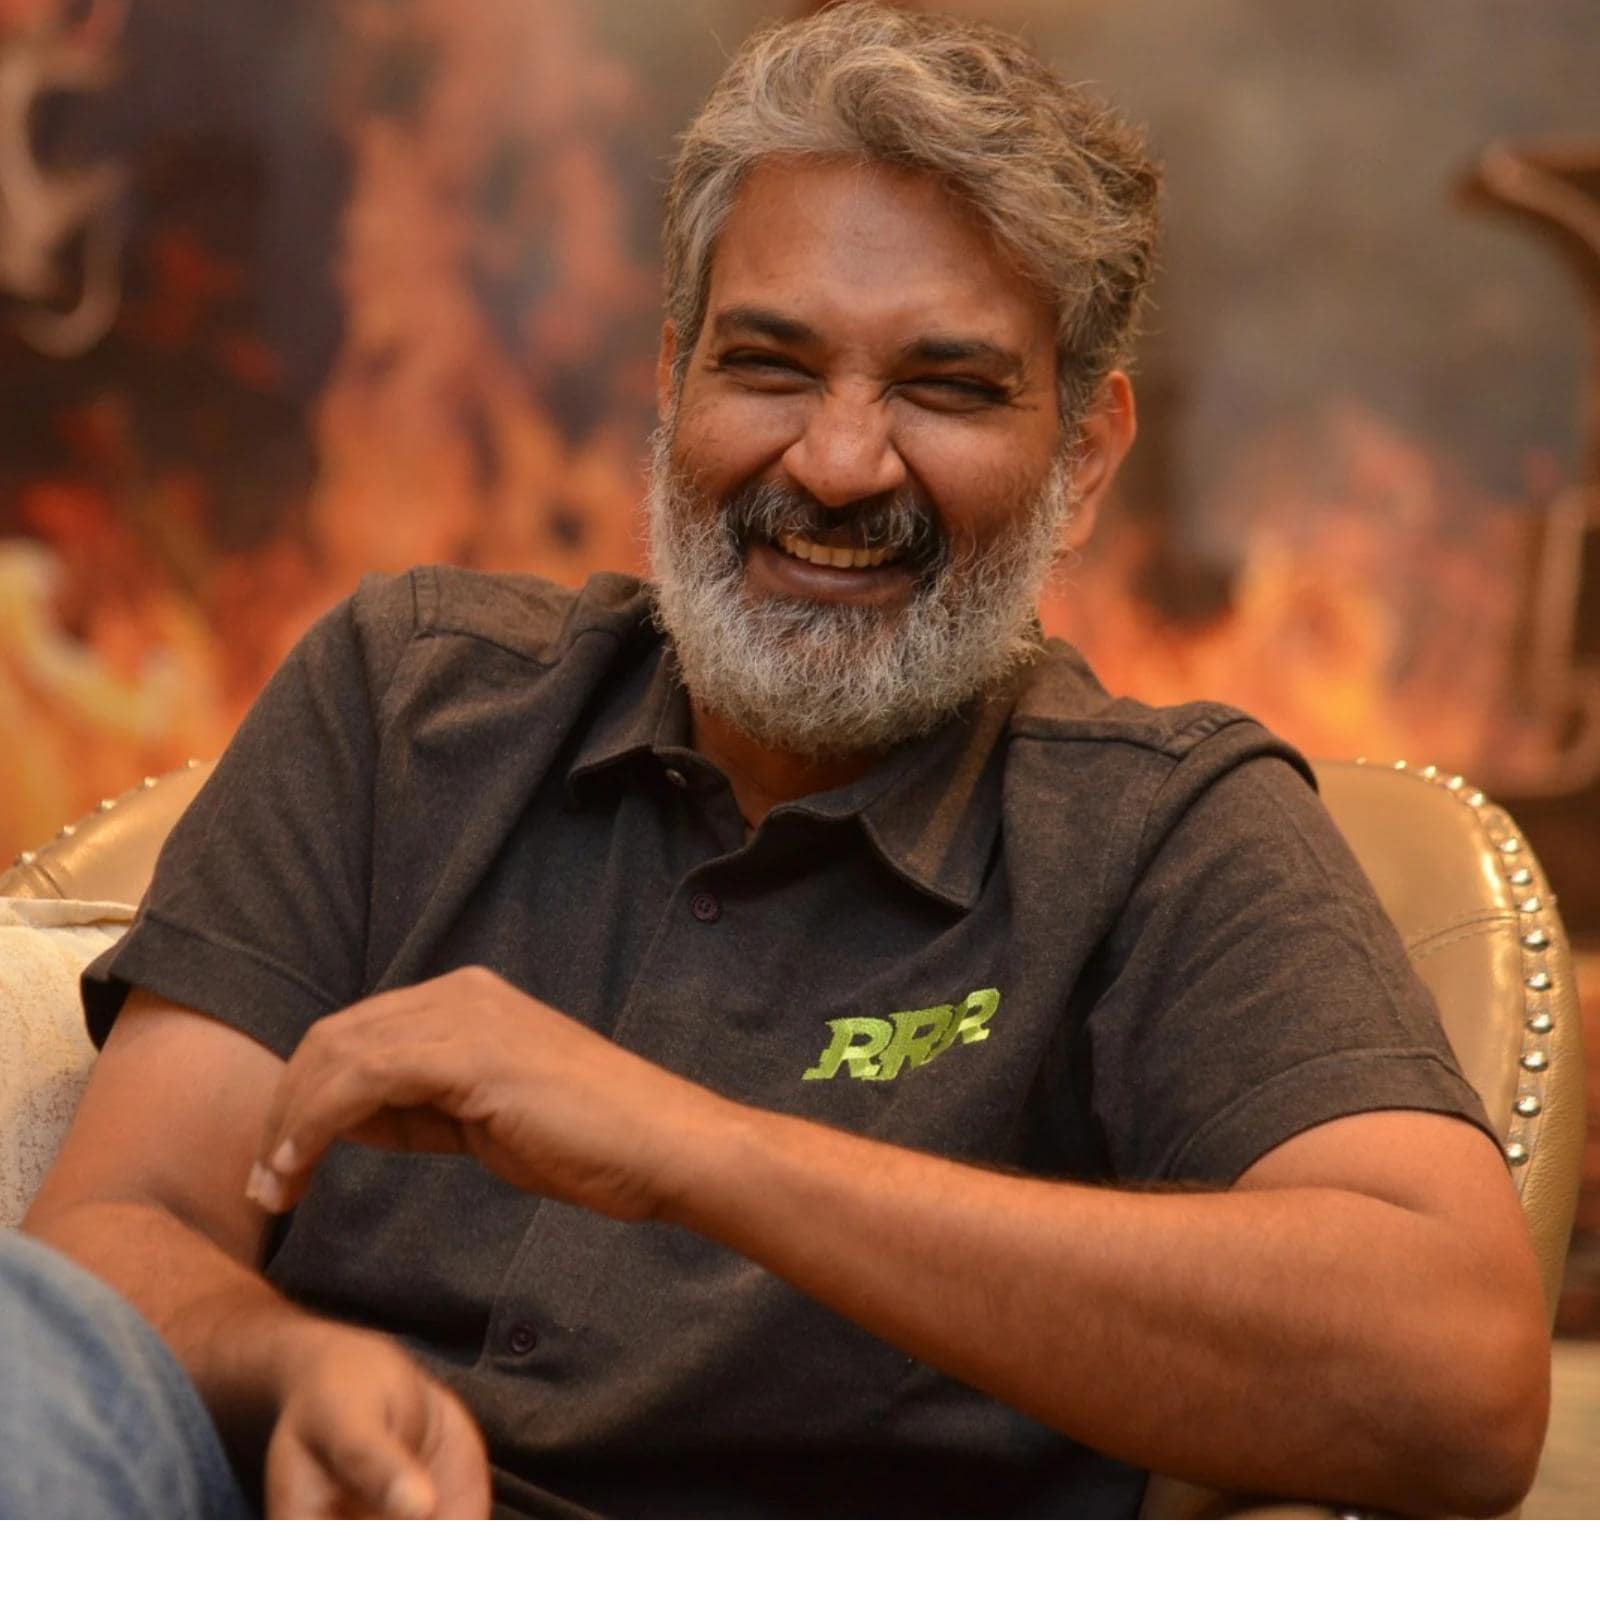 SS Rajamouli Could Bring Marvel To India! 'Avengers' Star to Work With Mahesh Babu? 